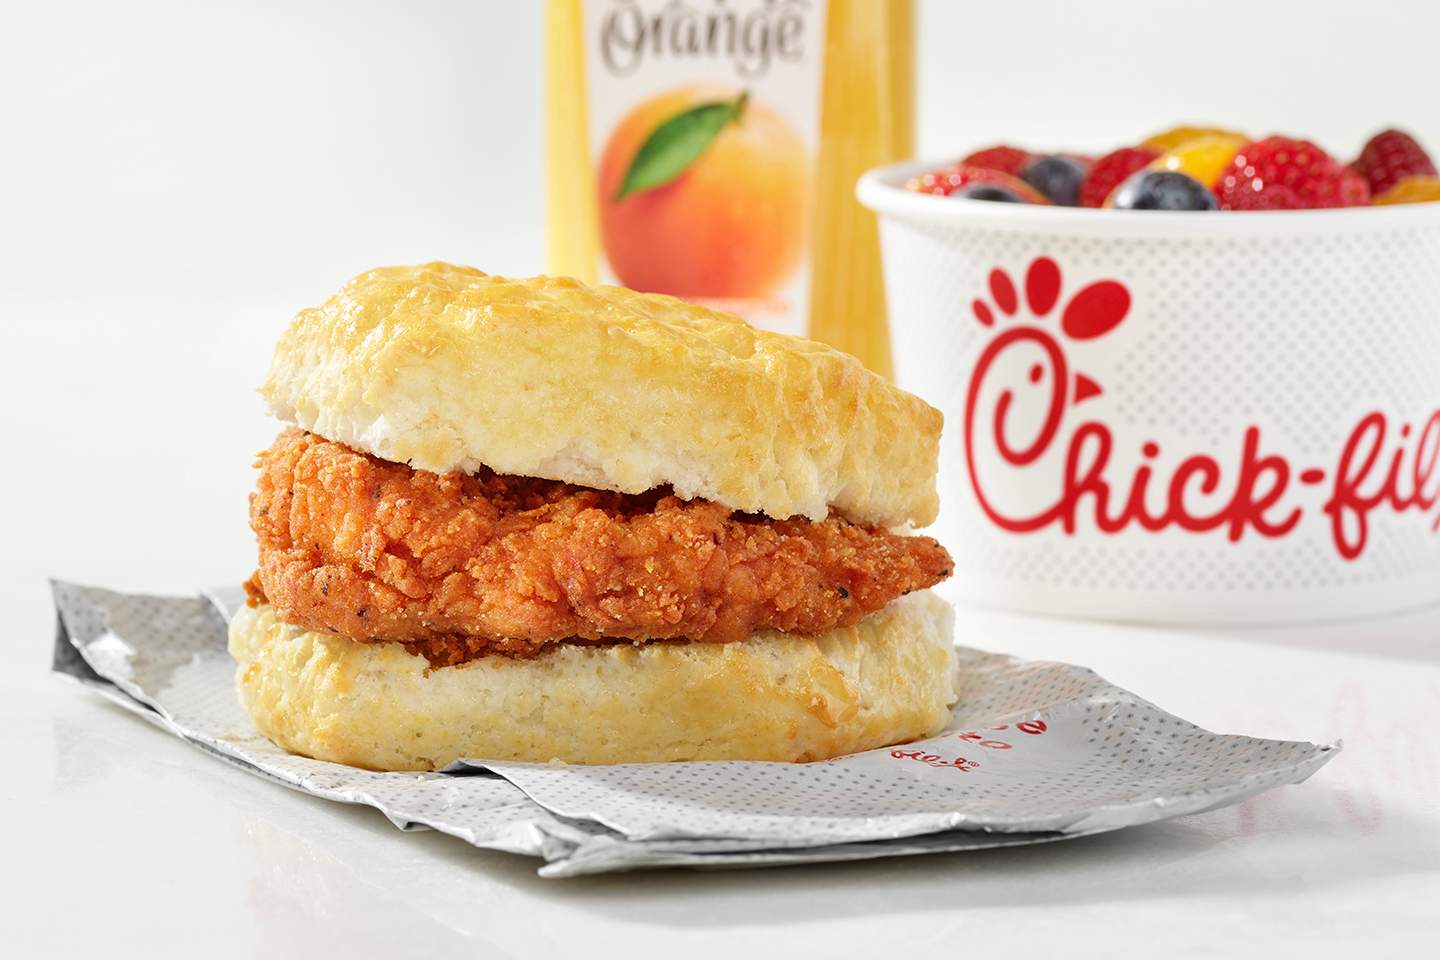 calories in chick fil a chicken biscuit